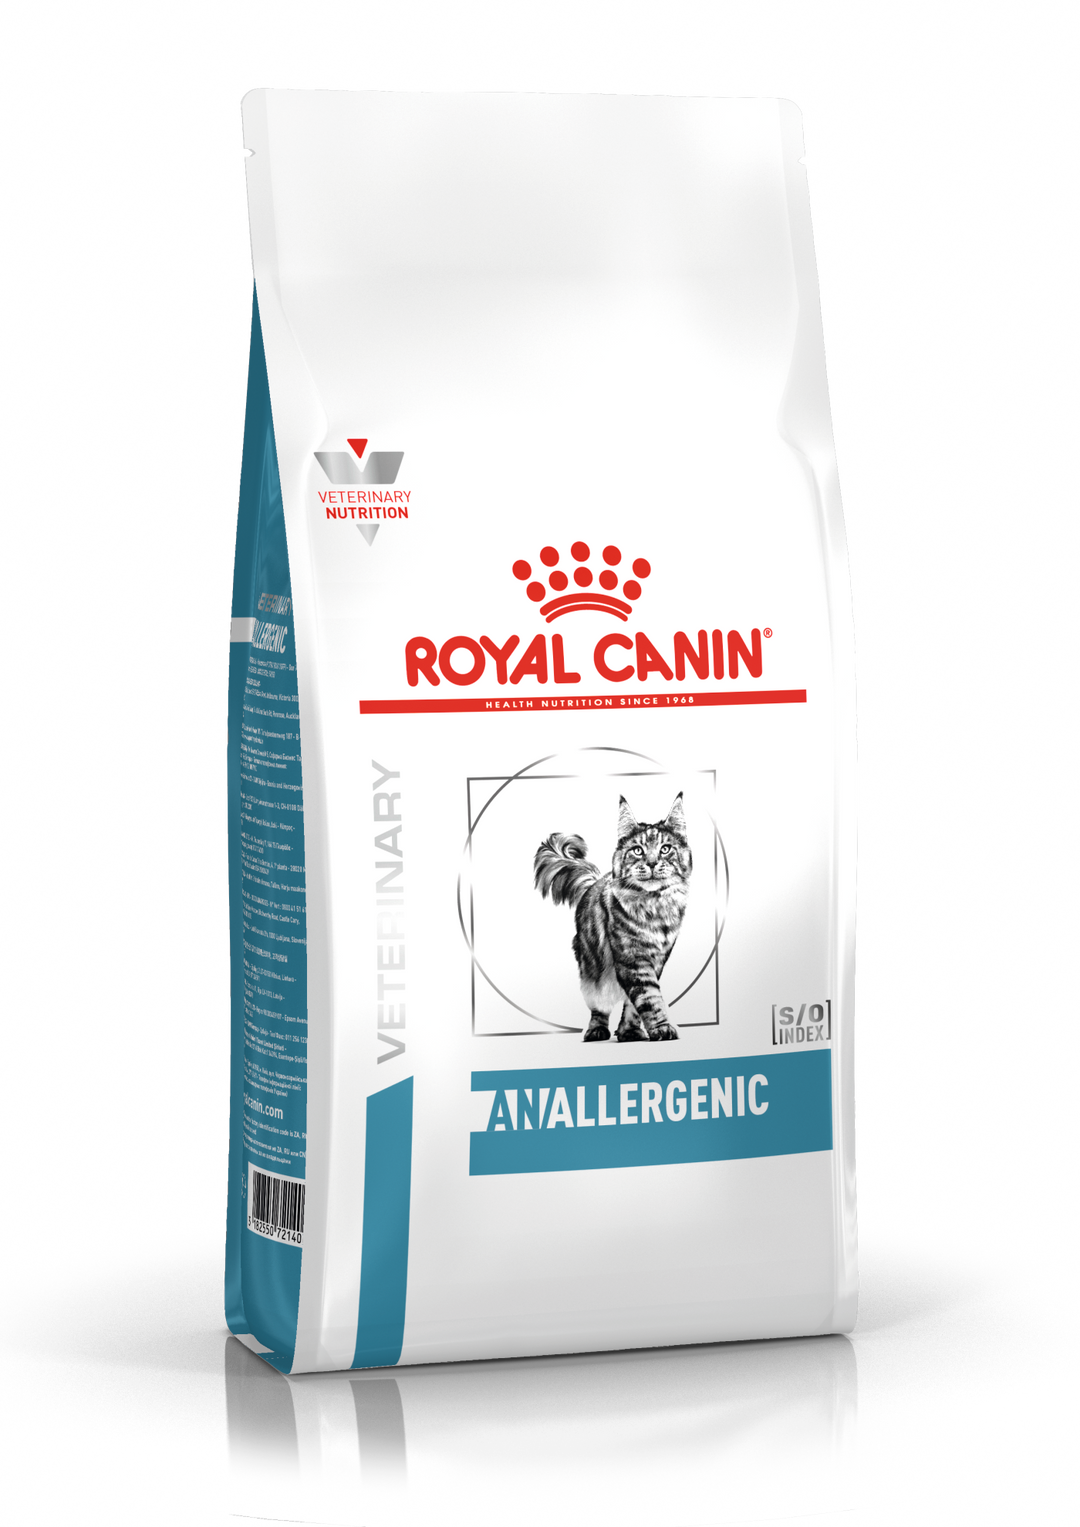 Royal Canin Anallergenic for Cats